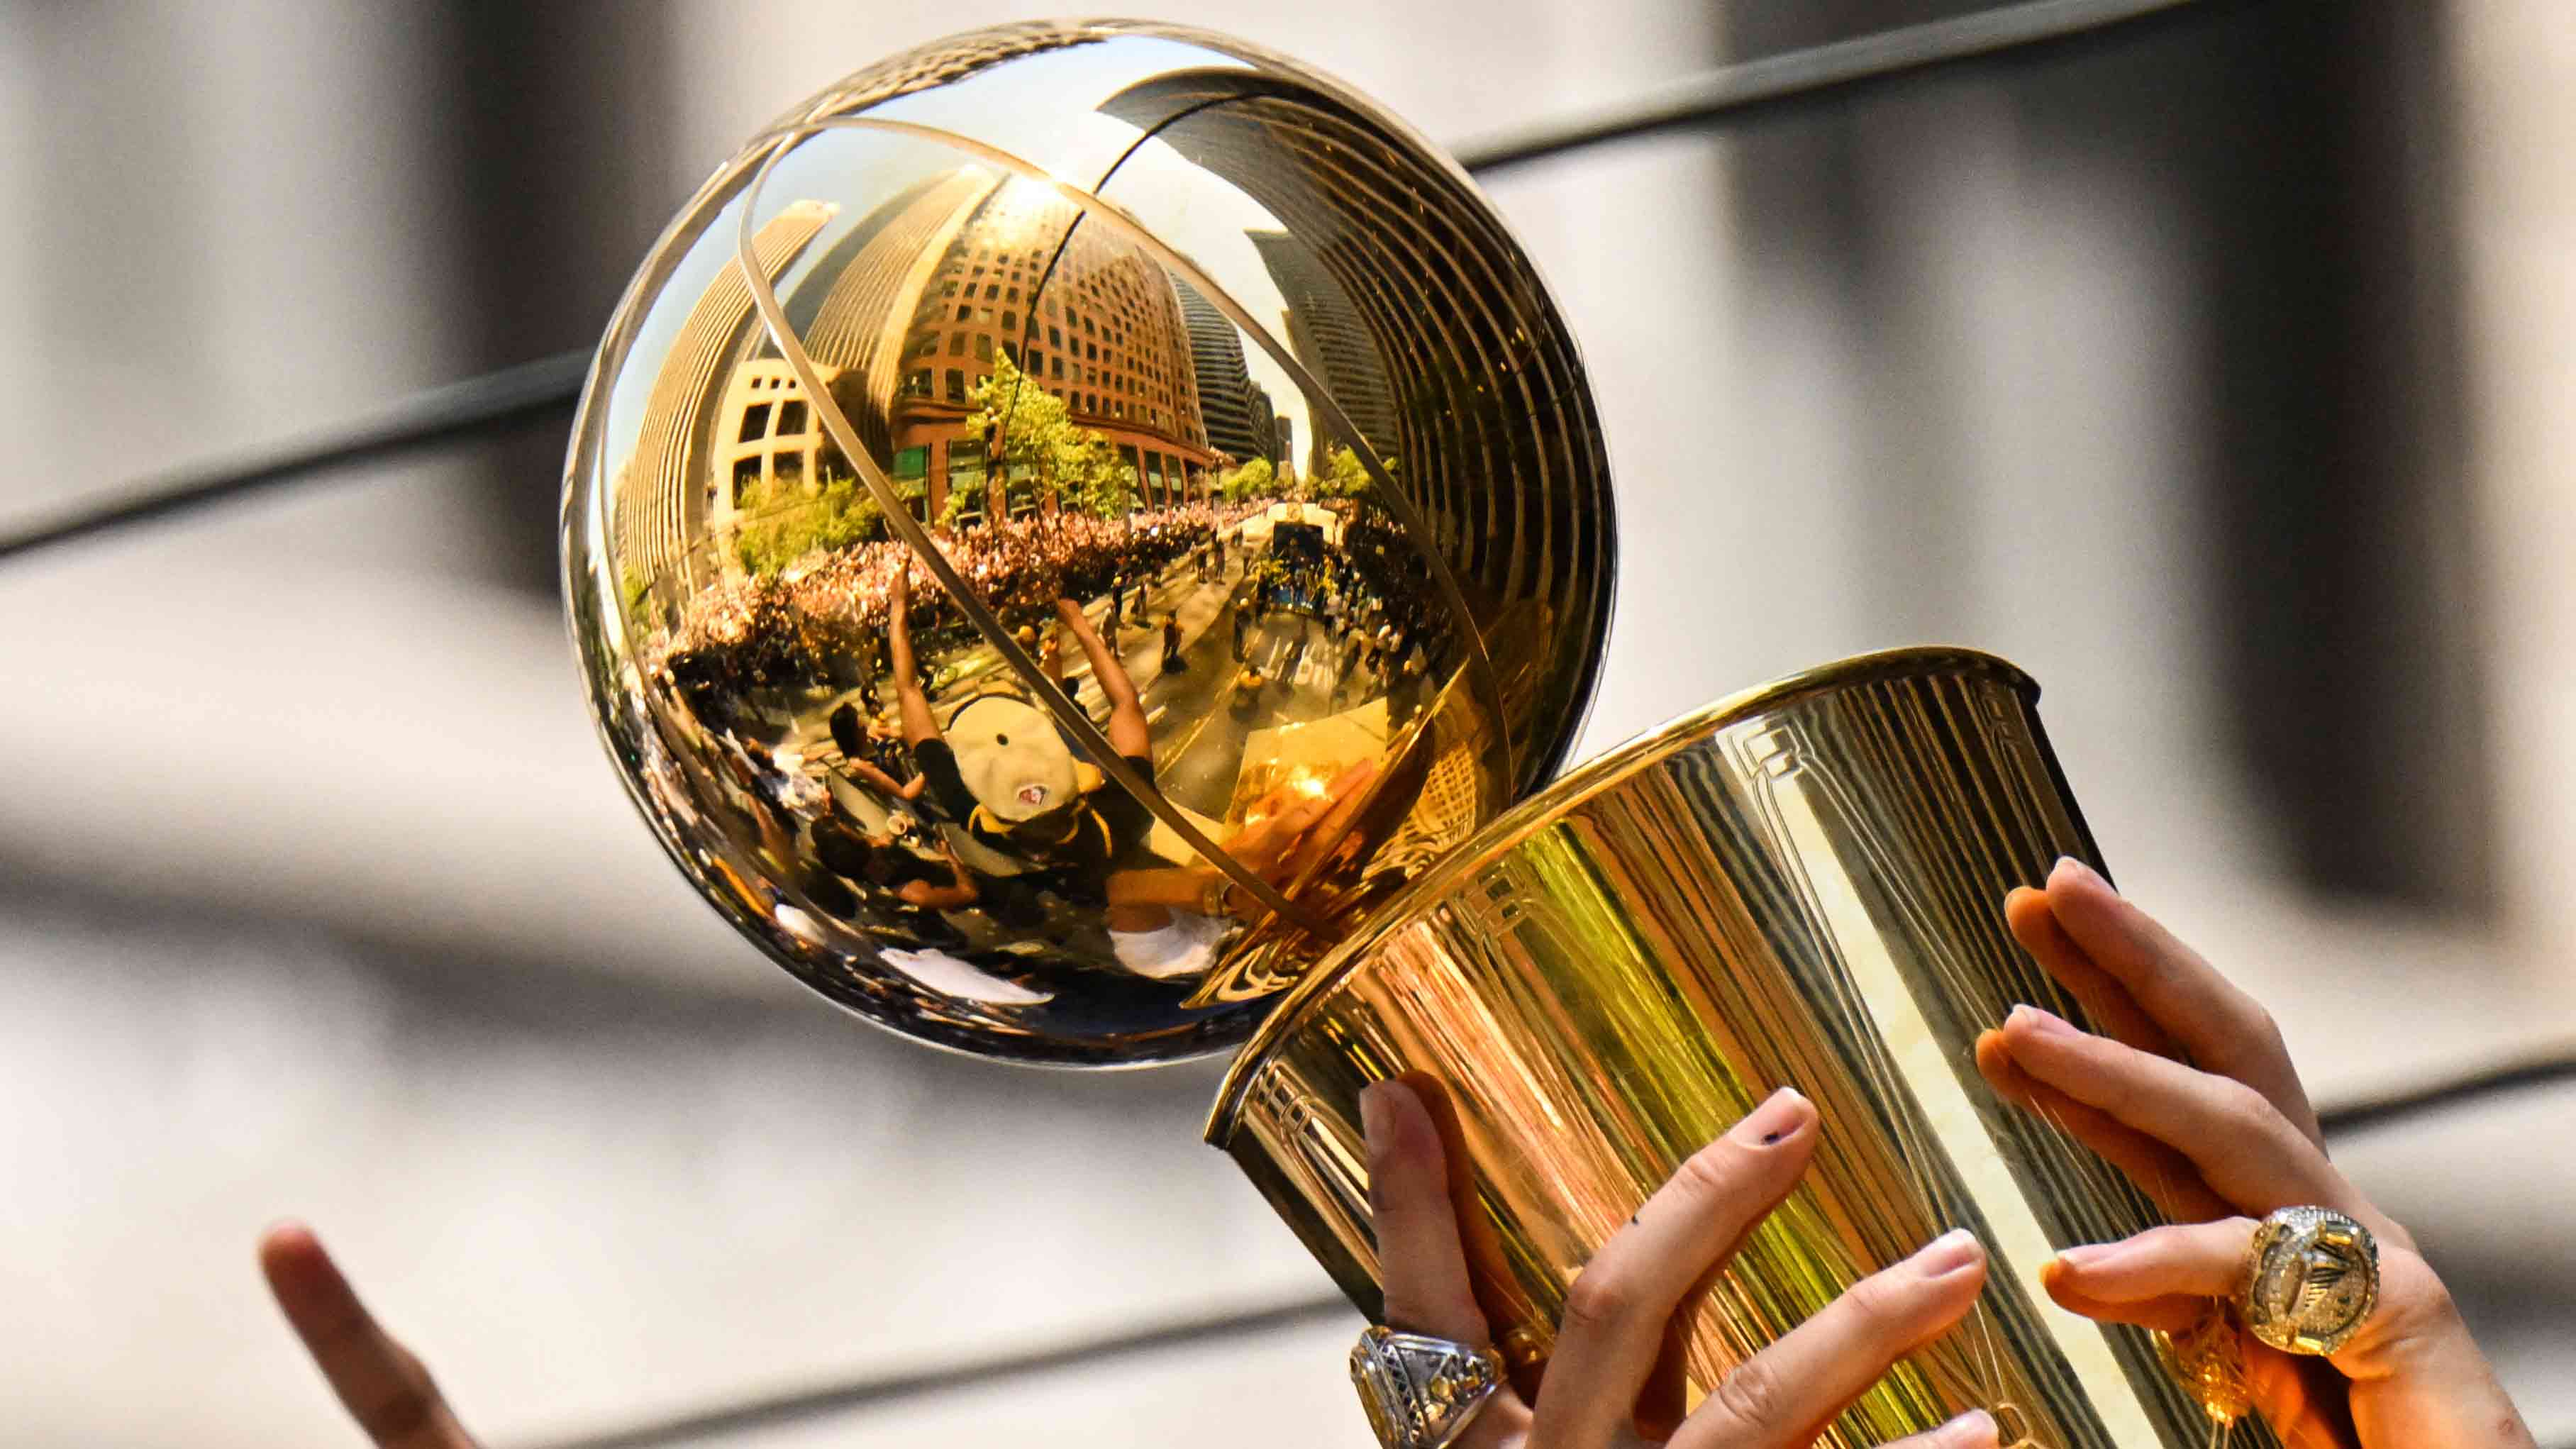 Basketball Trophies Designed by Tiffany